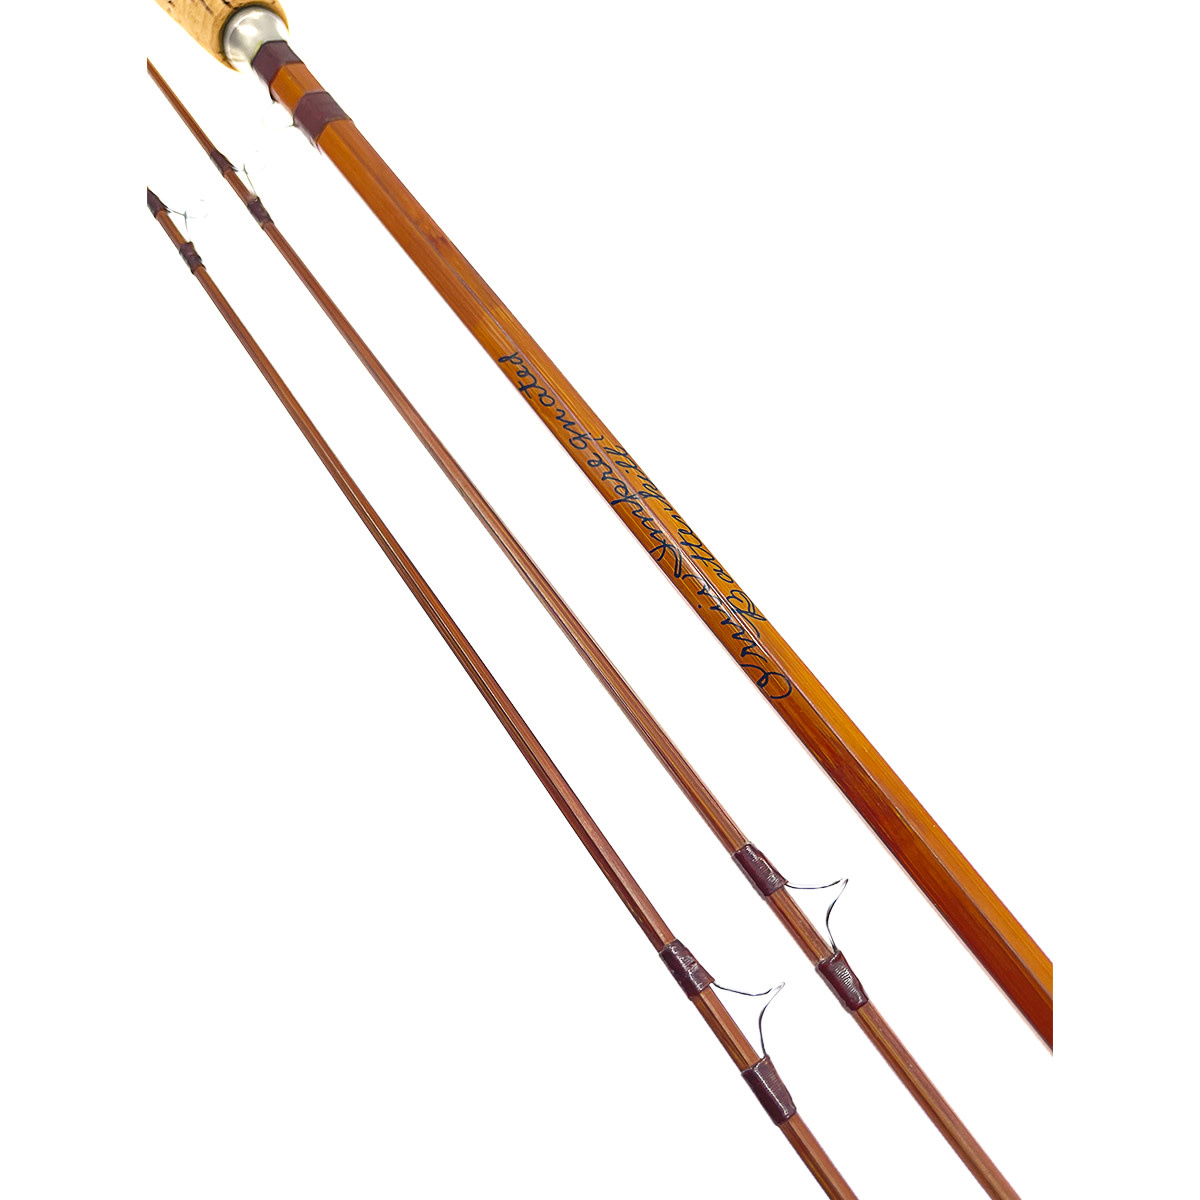 Orvis Orvis Battenkill Bamboo Fly Rod 7’ - 6 weight, 2pc.  - Impregnated